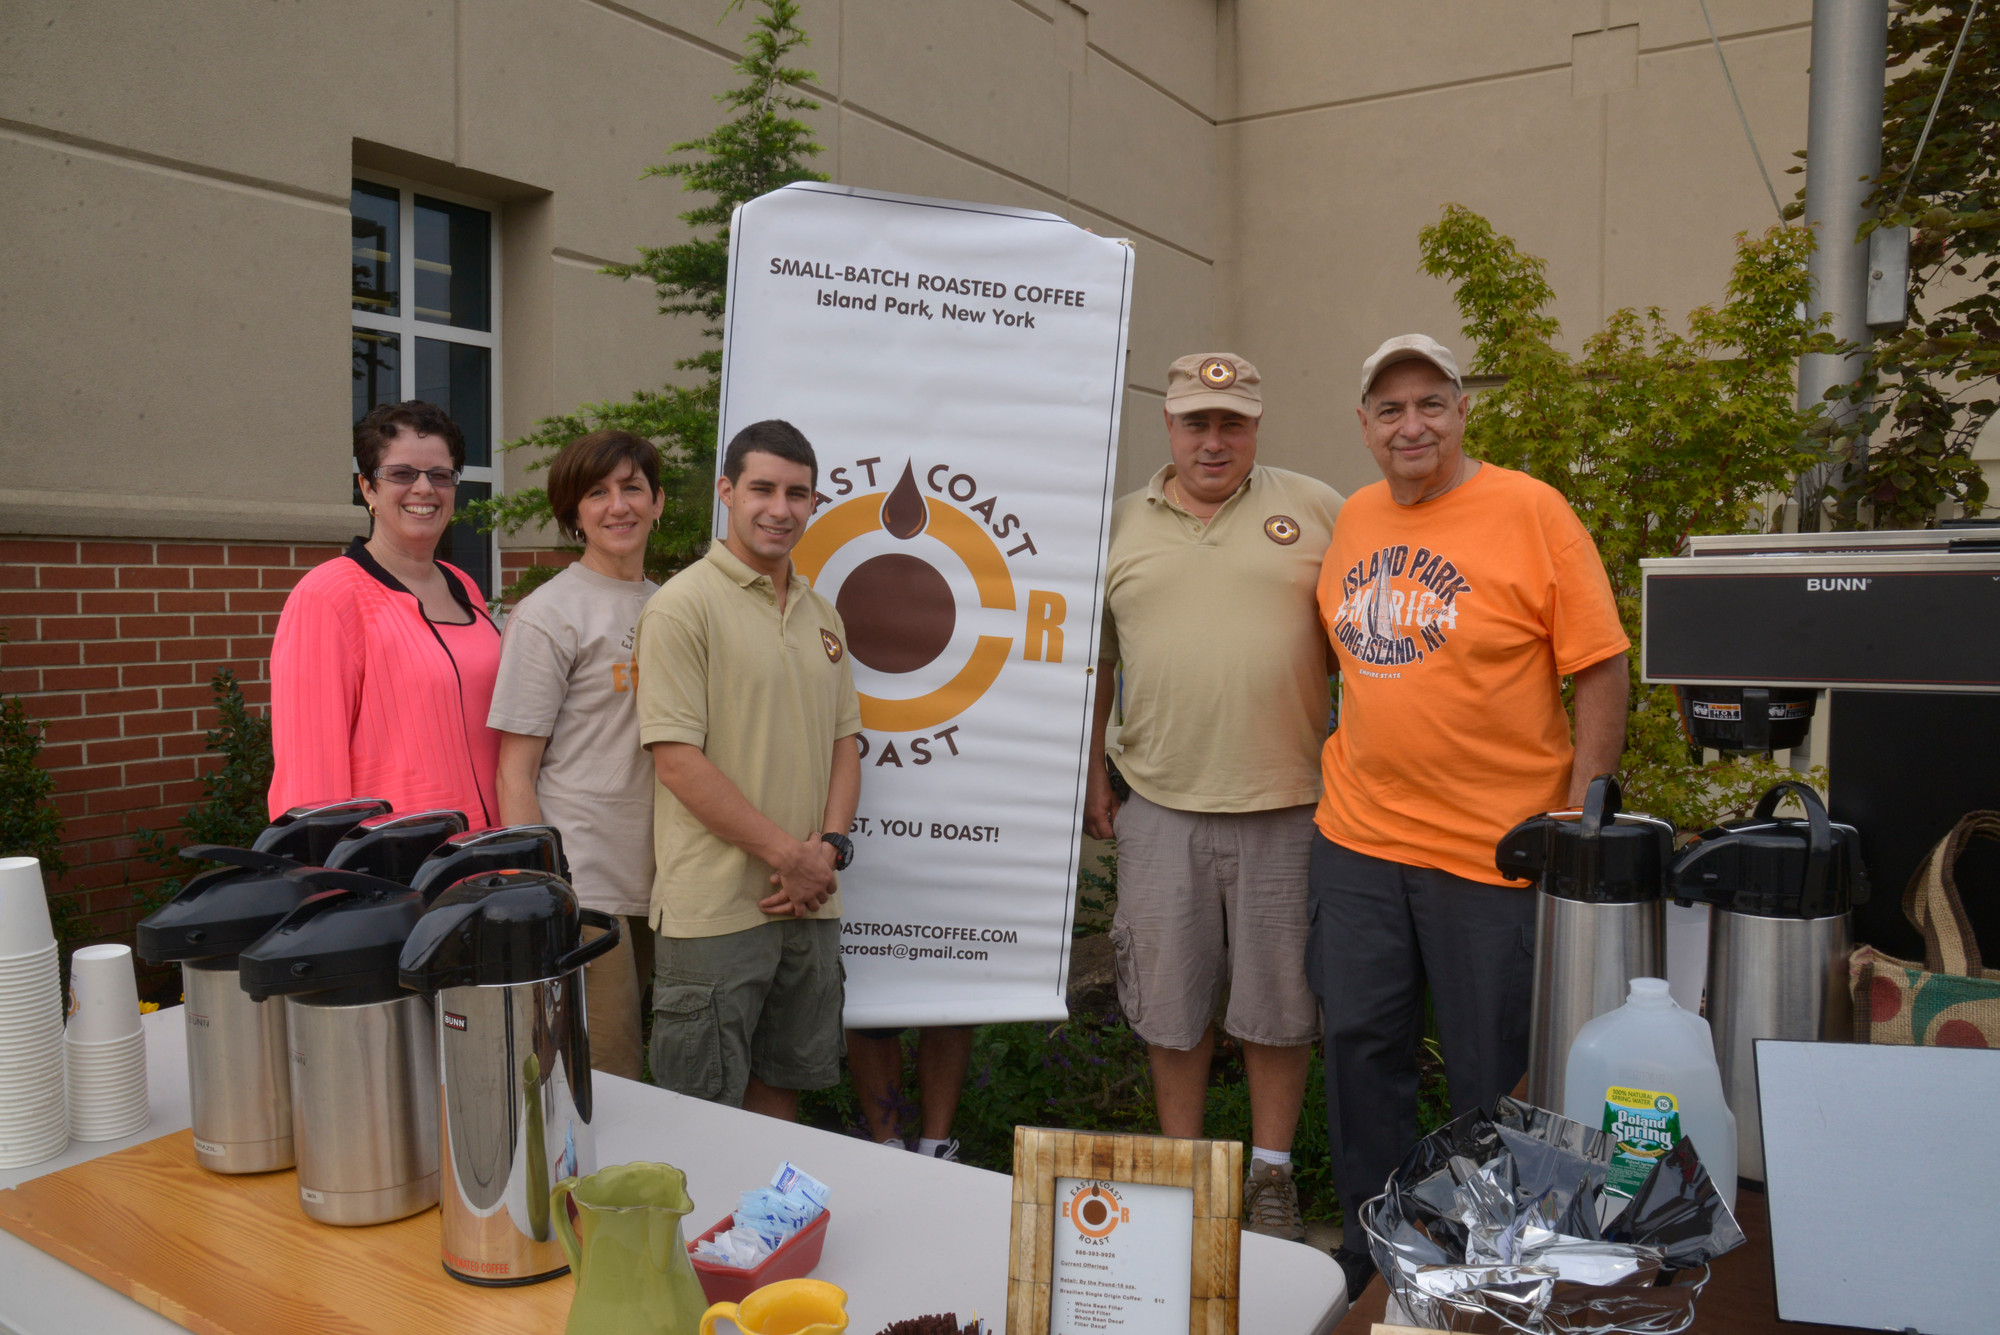 Library director Jessica Koenig (left), Richard Maryanne and John Comuniello  from East Coast Coffee, the company that donated coffee for the event, with library trustee Joe Ponte at the community welcome ceremony last week.